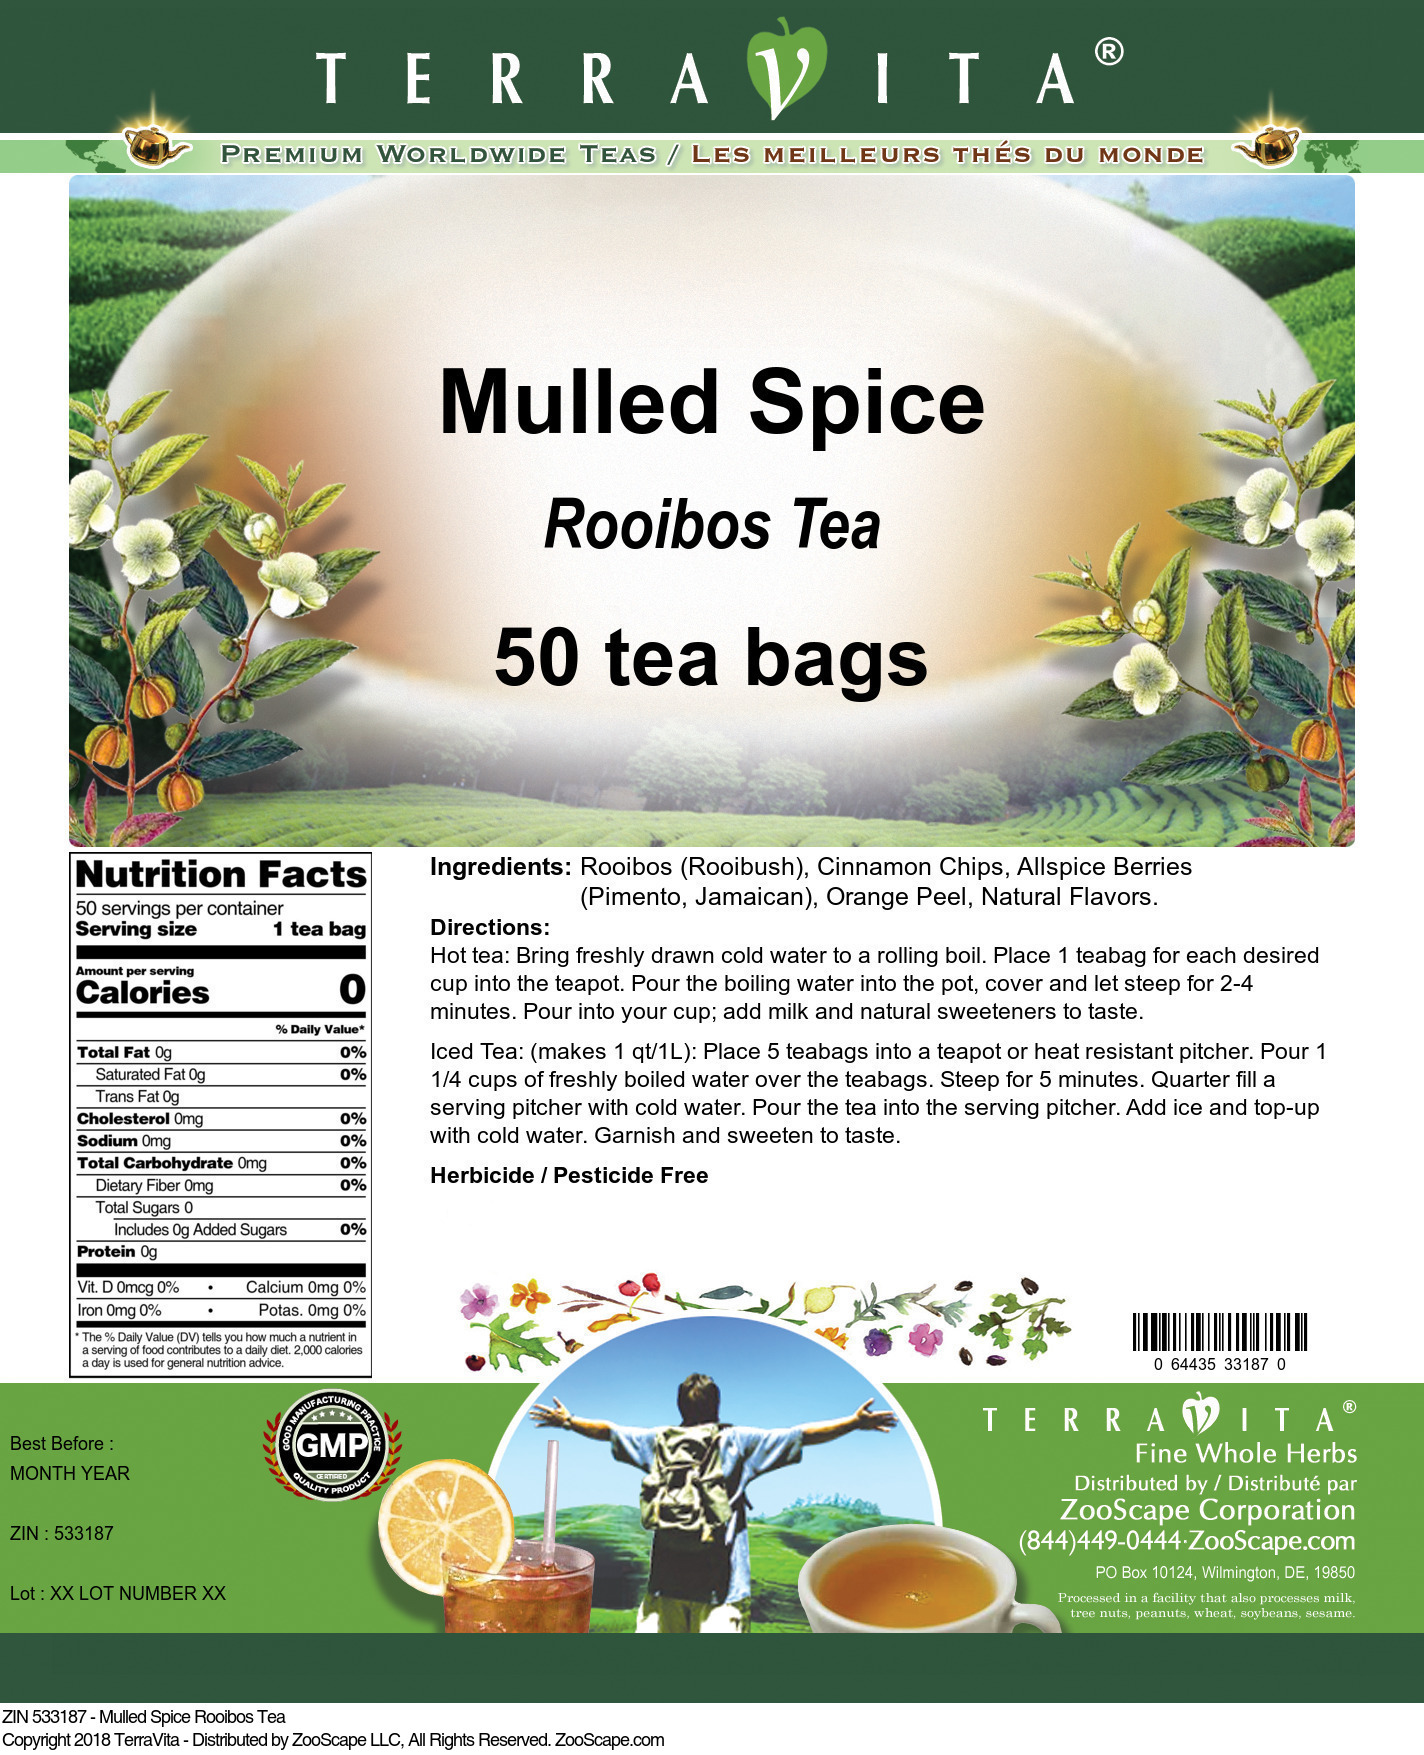 Mulled Spice Rooibos Tea - Label